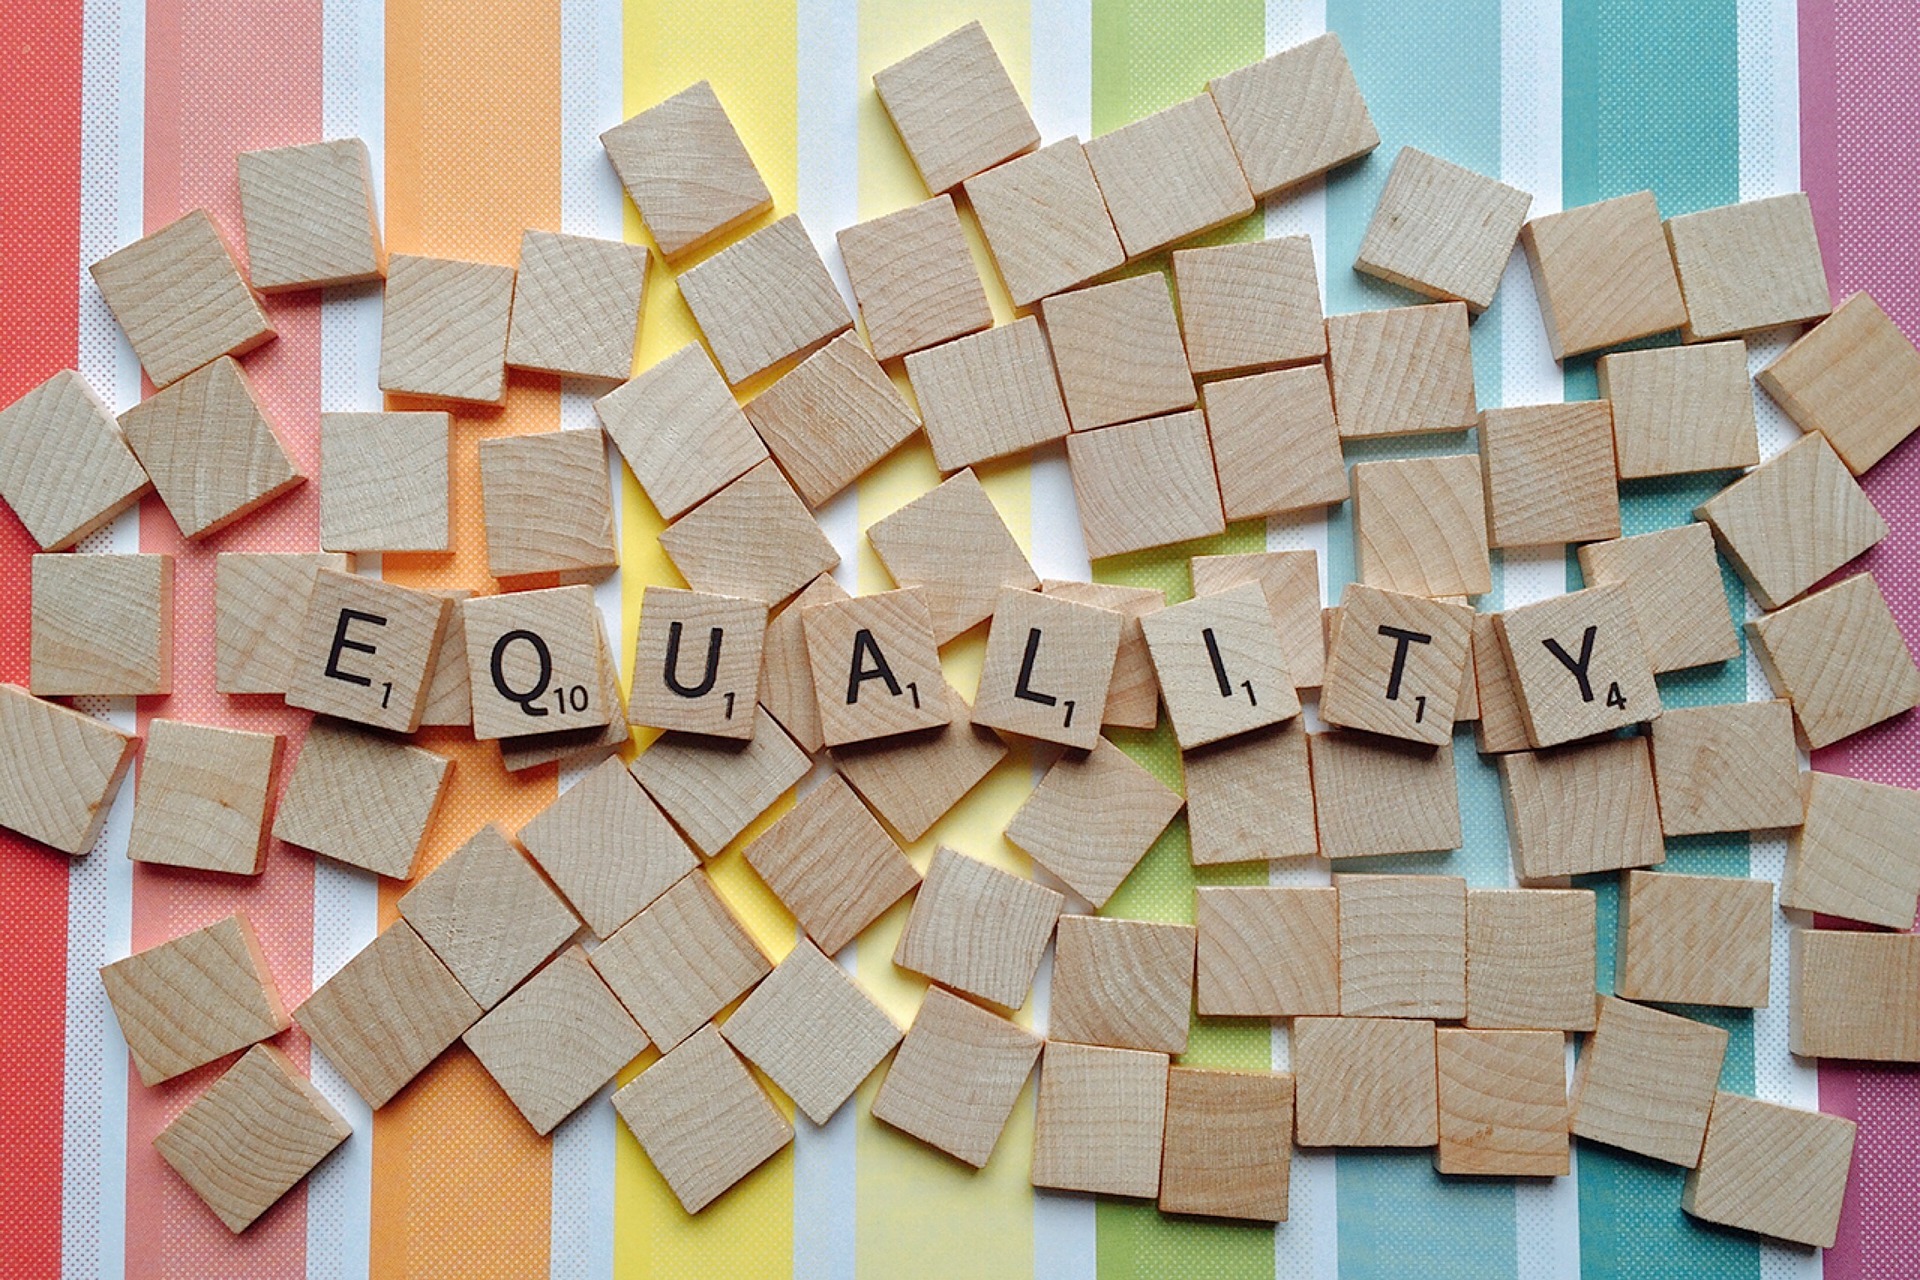 Equality spelled out on wooden scrabble blocks